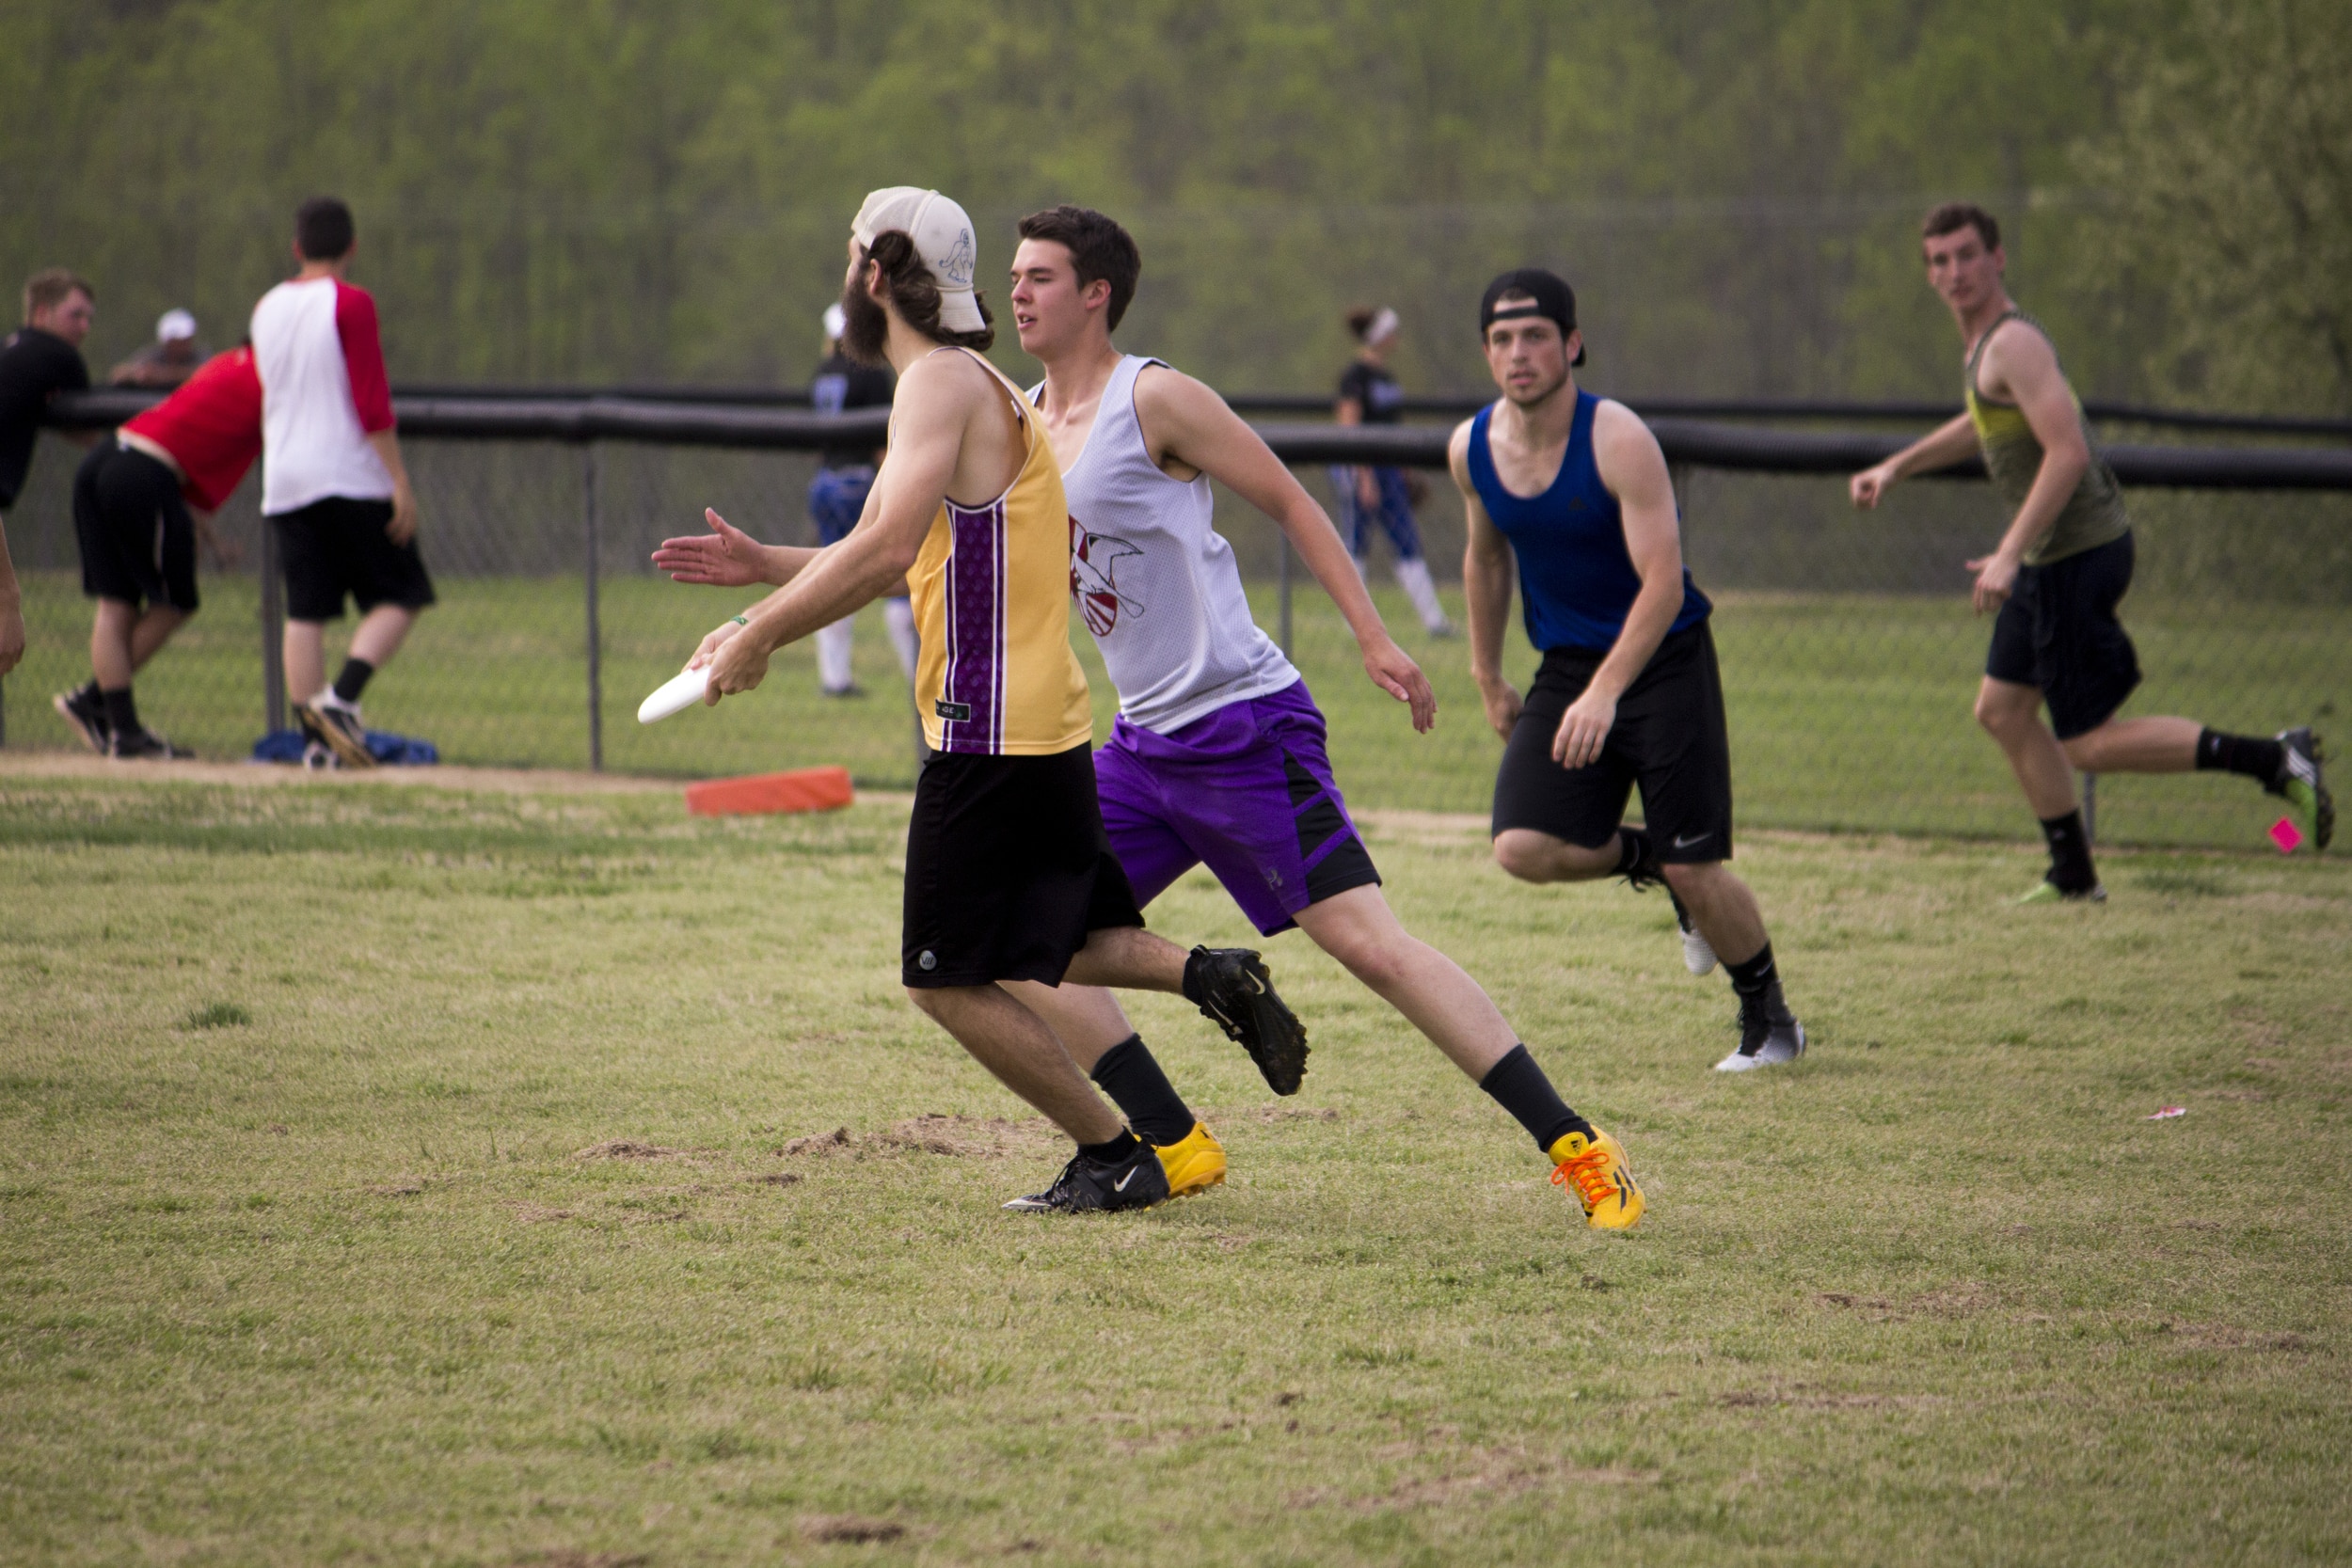  Senior&nbsp;Eric Payne looks downfield to pass to one of his members. 